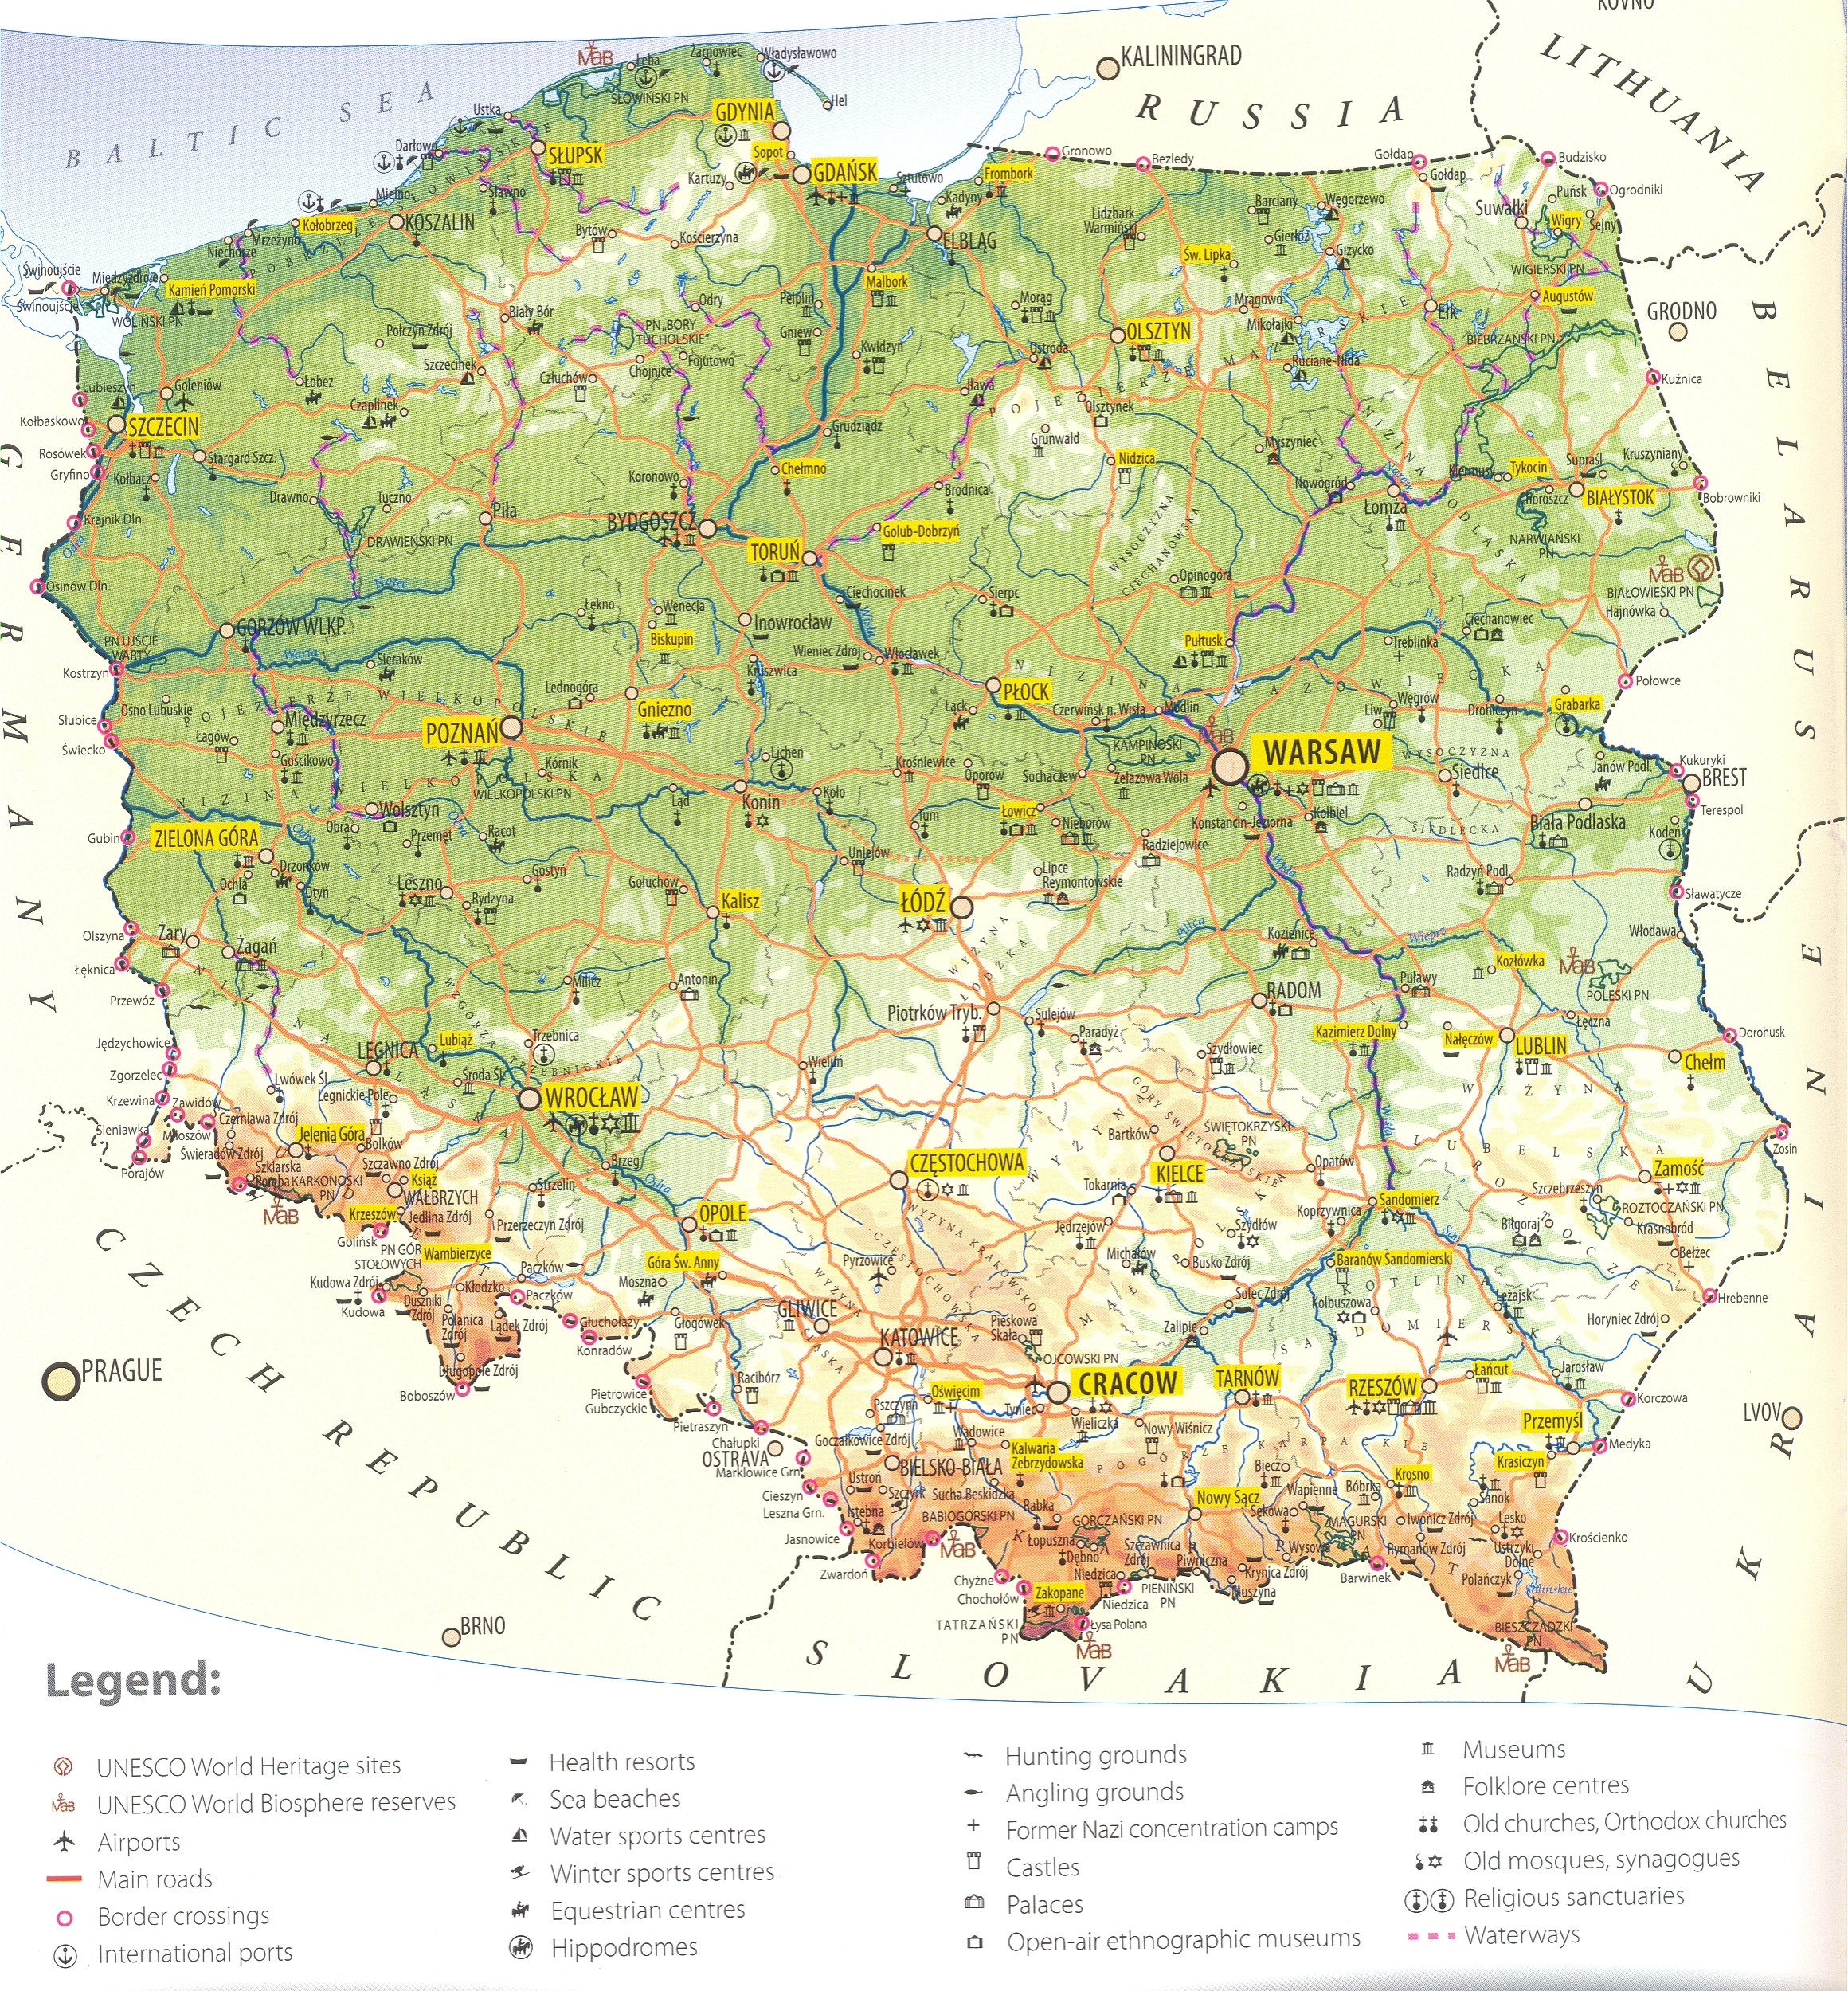 CLICK ON THIS MAP OF POLAND AND IT WILL ENLARGE